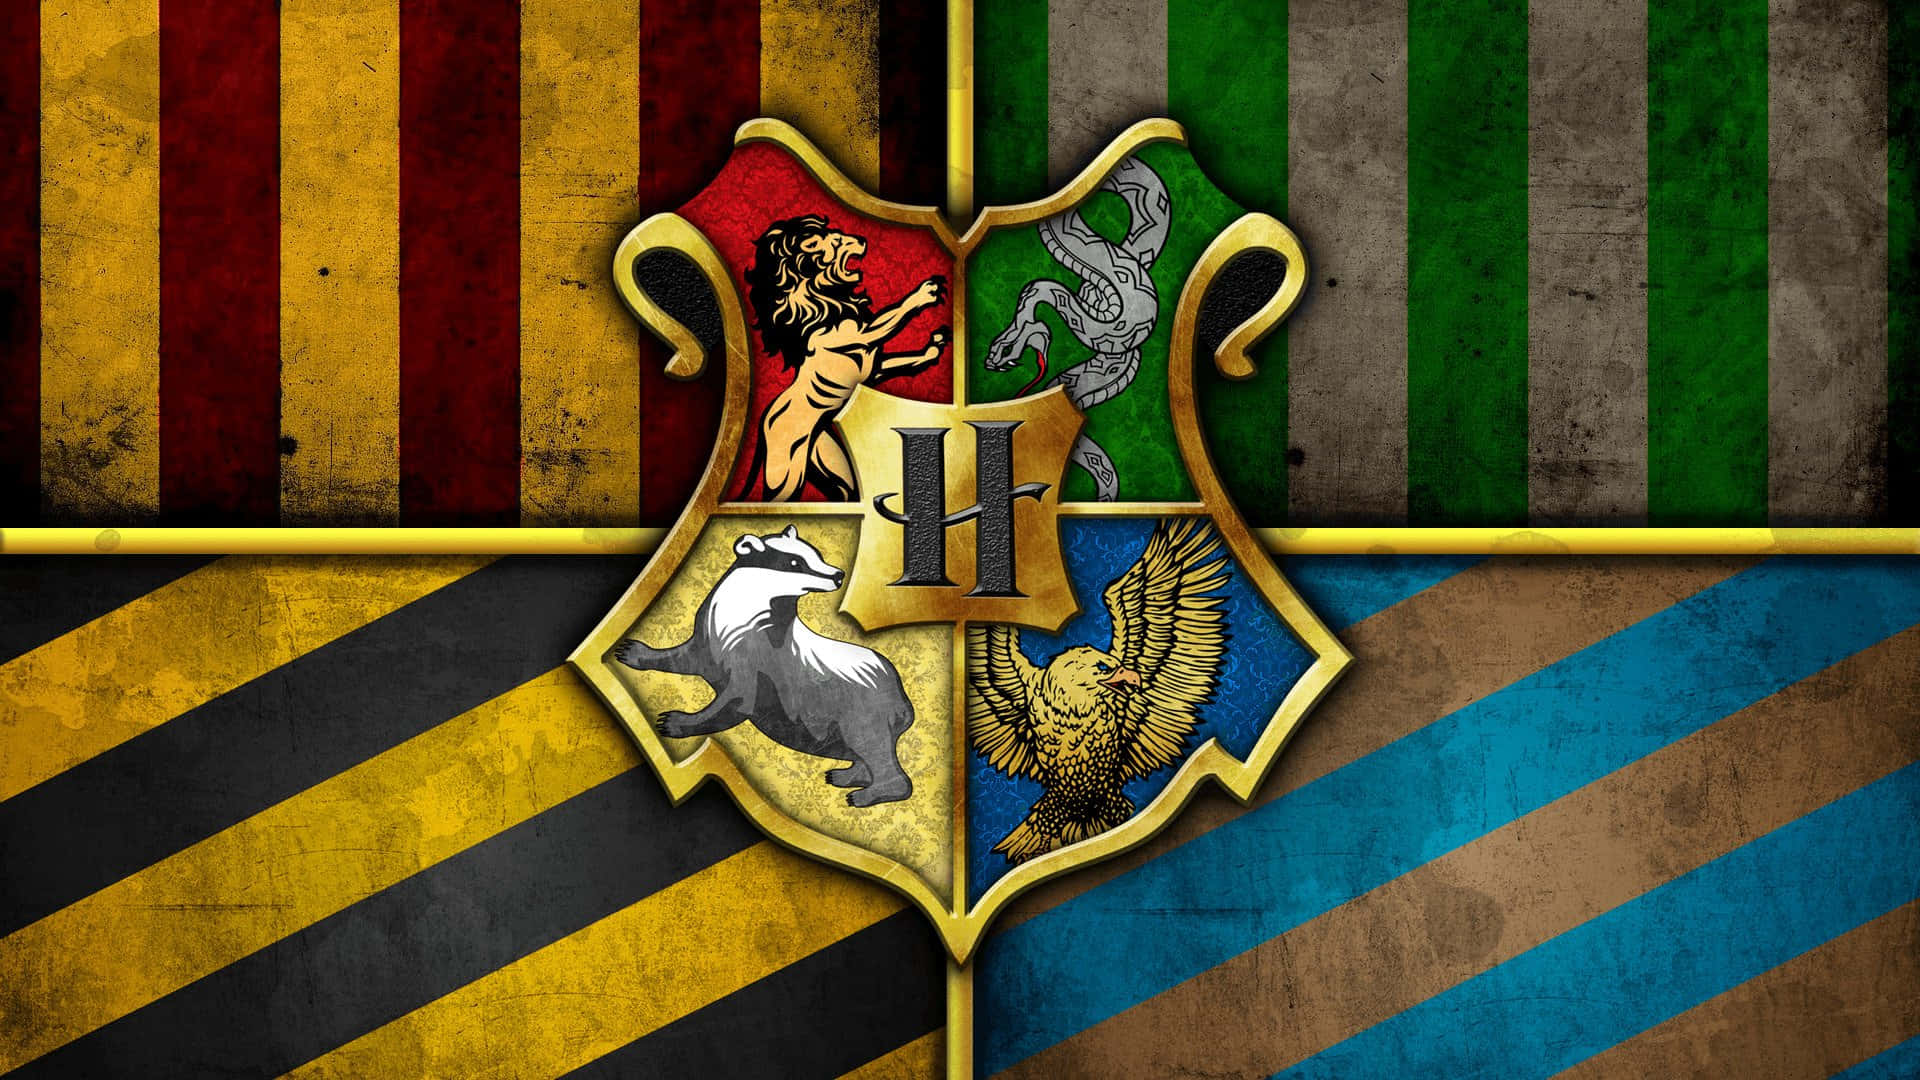 Representing the 4 Hogwarts Houses - Gryffindor, Hufflepuff, Ravenclaw and Slytherin. Wallpaper